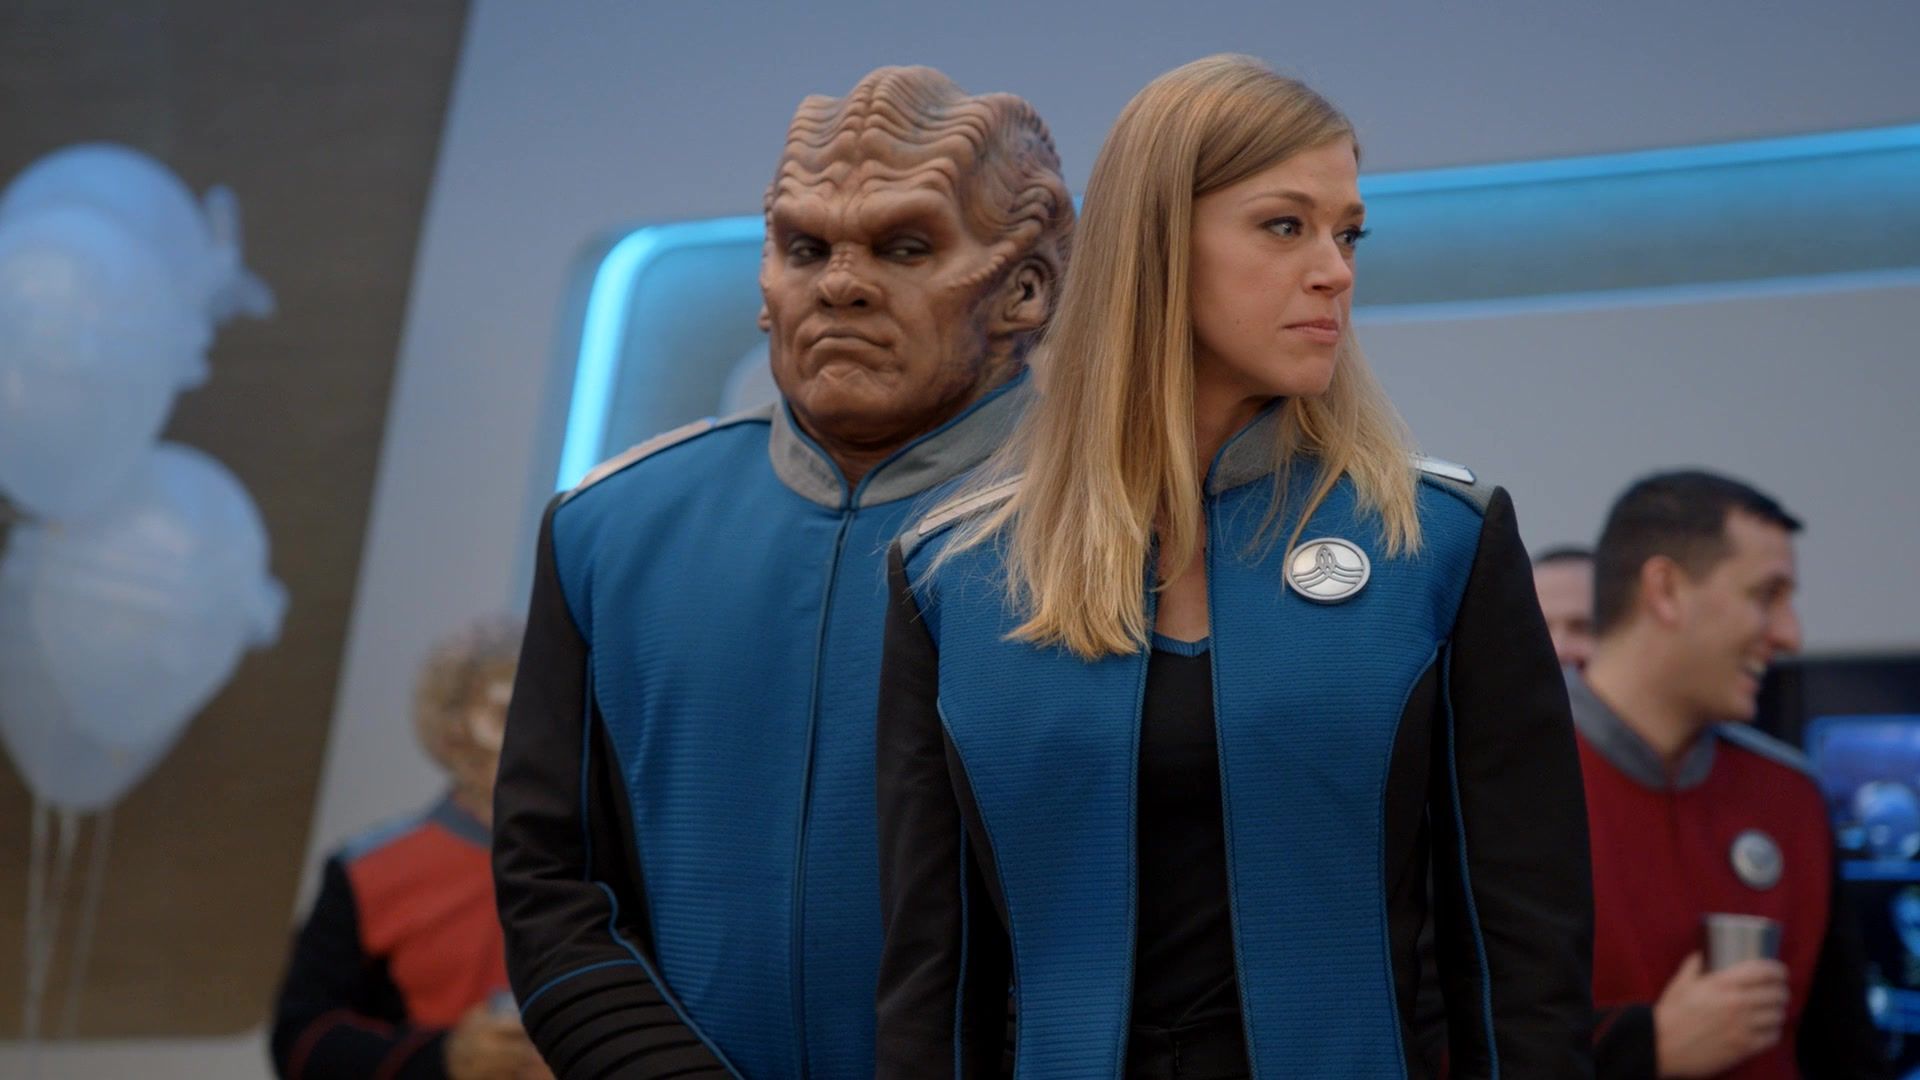 The_Orville_S02E05_All_the_World_is_Birthday_Cake_1080p_AMZN_WEB-DL_DDP5_1_H_264-NTb_2167.jpg